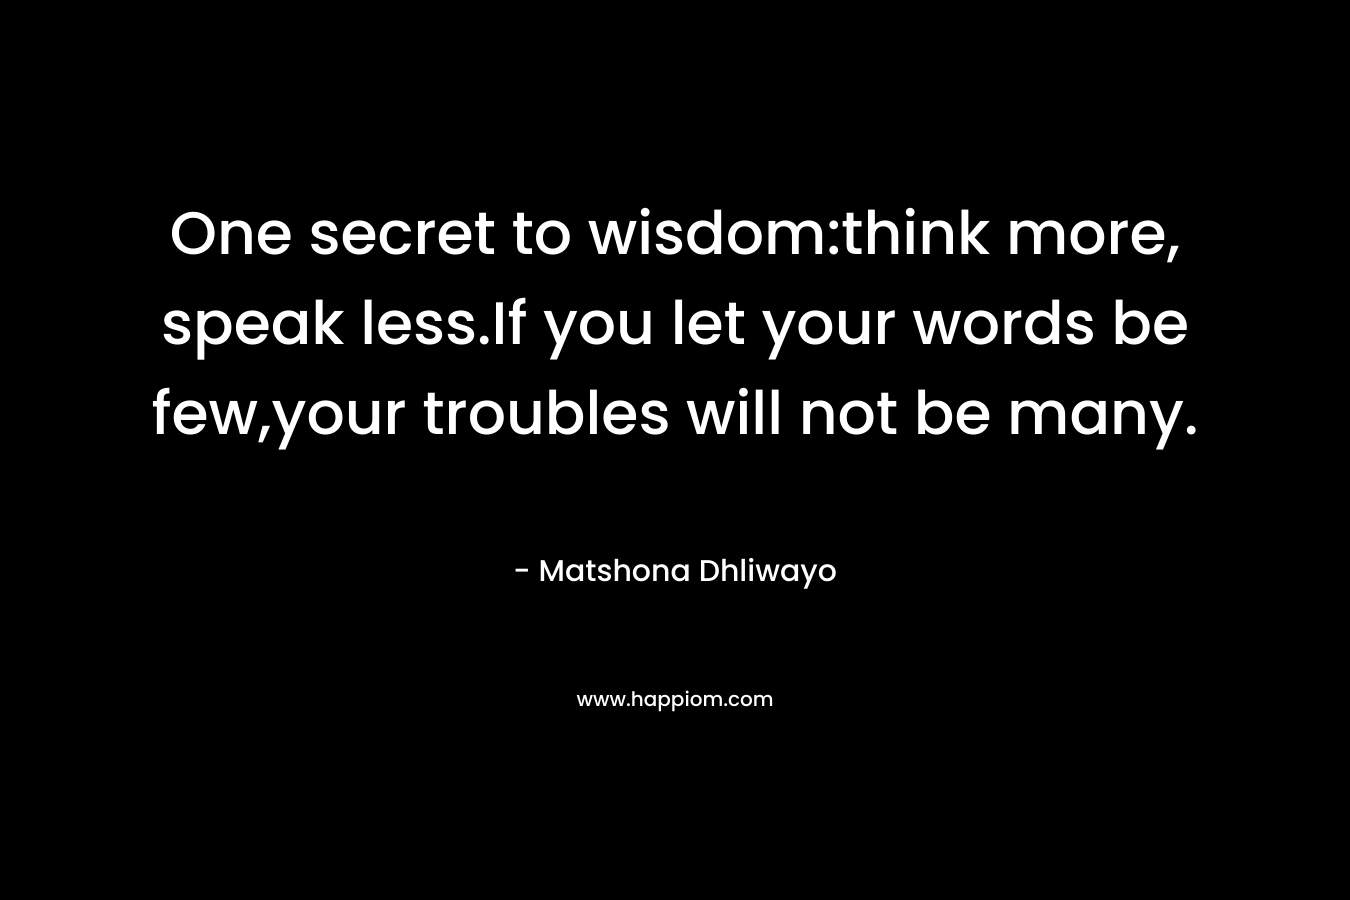 One secret to wisdom:think more, speak less.If you let your words be few,your troubles will not be many.